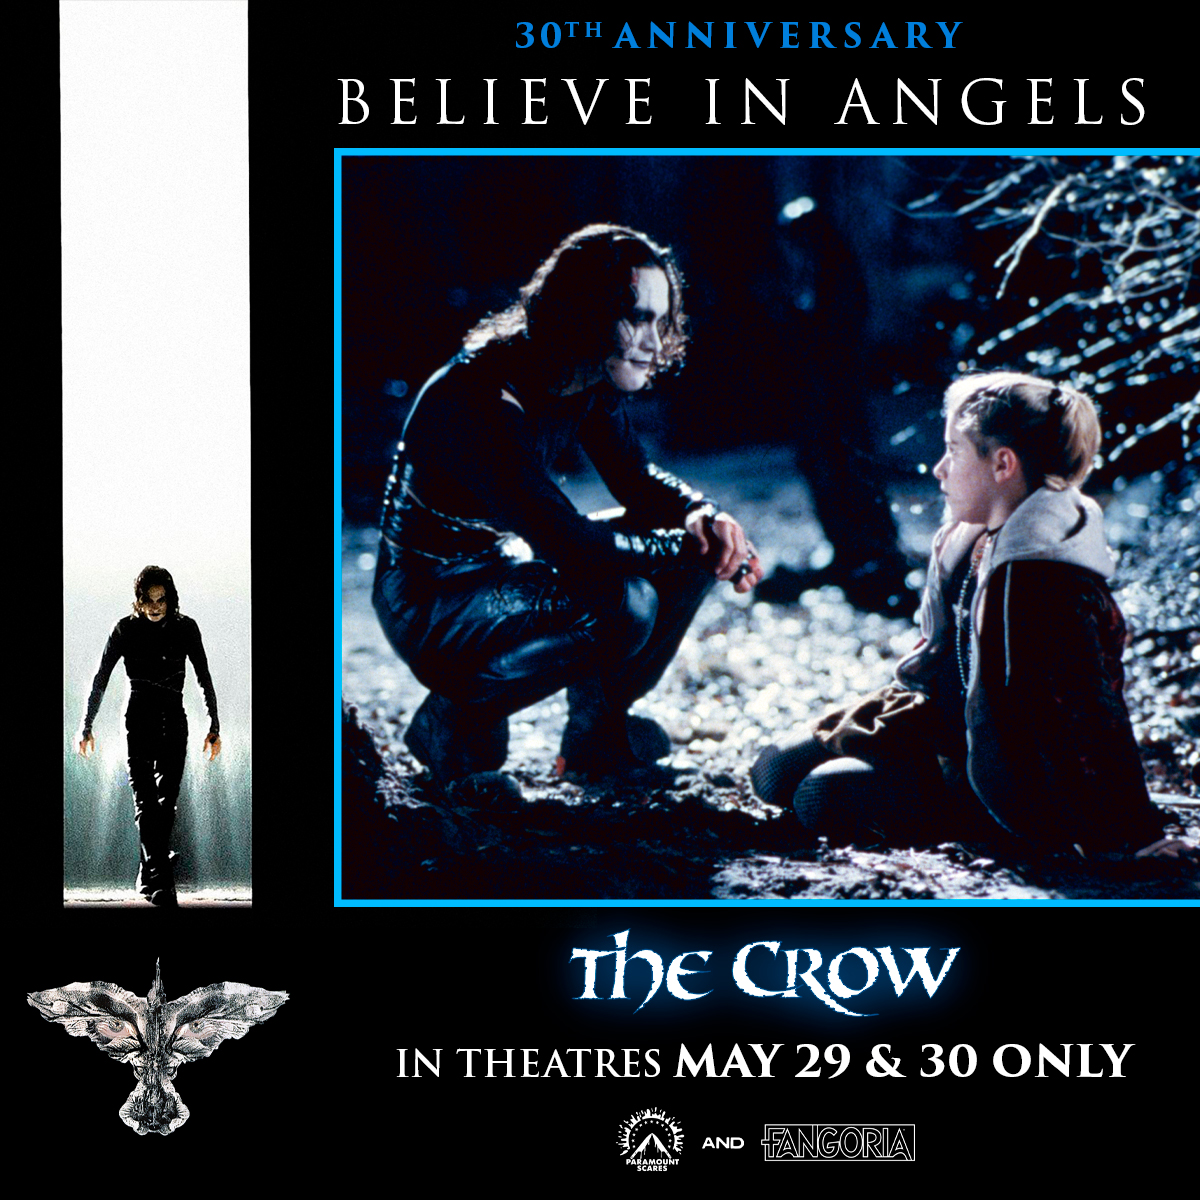 In a world without justice, one man was chosen to protect the innocent. Alex Proyas' 1994 goth masterpiece, #TheCrow, starring Brandon Lee, returns to the big screen for two nights only, May 29th and 30th.

Get your tickets now: thecrow1994.com